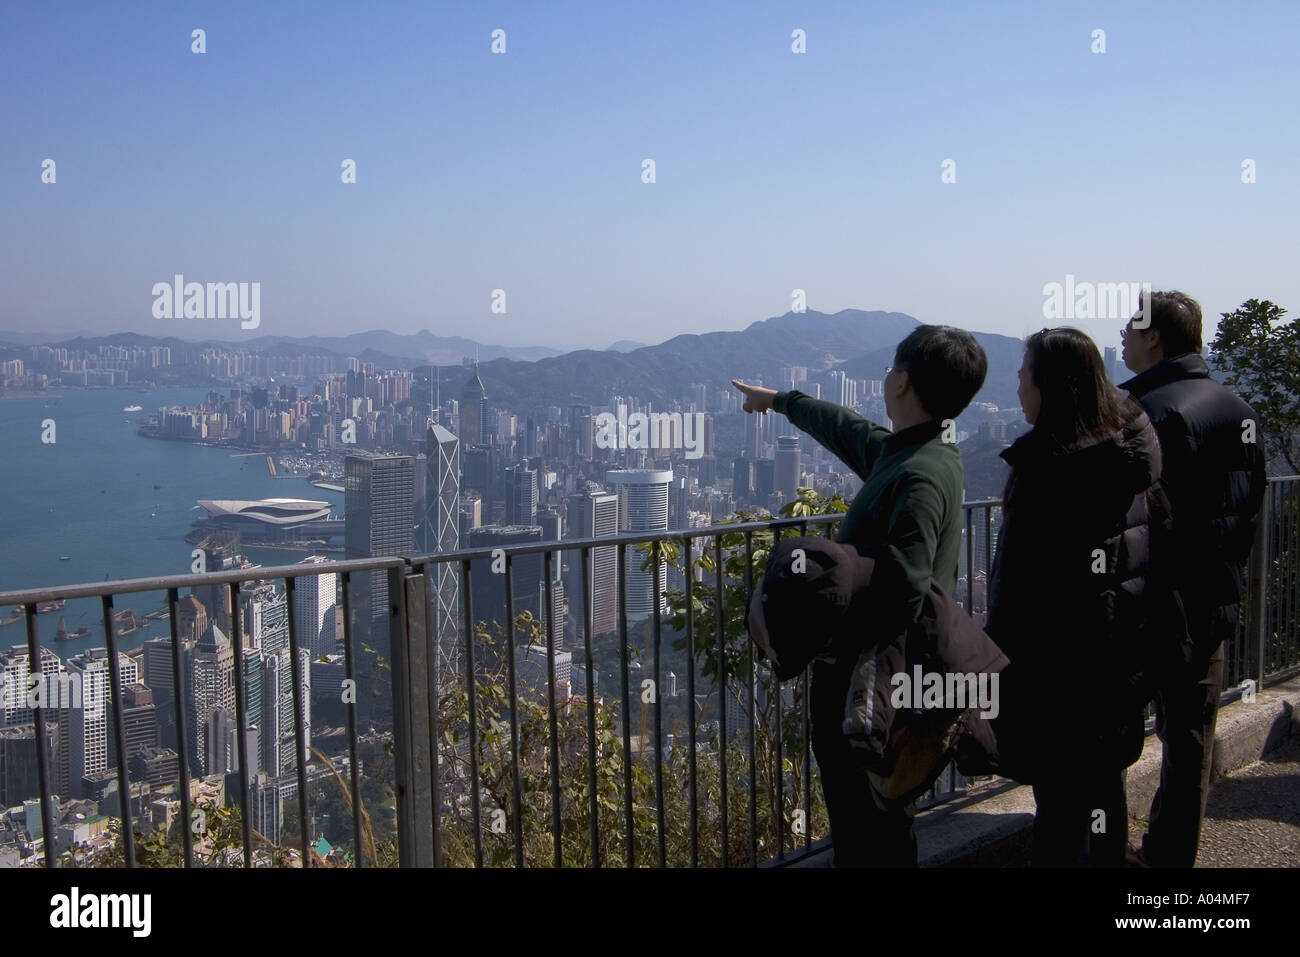 dh Luggard Road VICTORIA PEAK HONG KONG People viewing skyscrapers harbour view city sightseeing circle walk path trail lookout vista Stock Photo